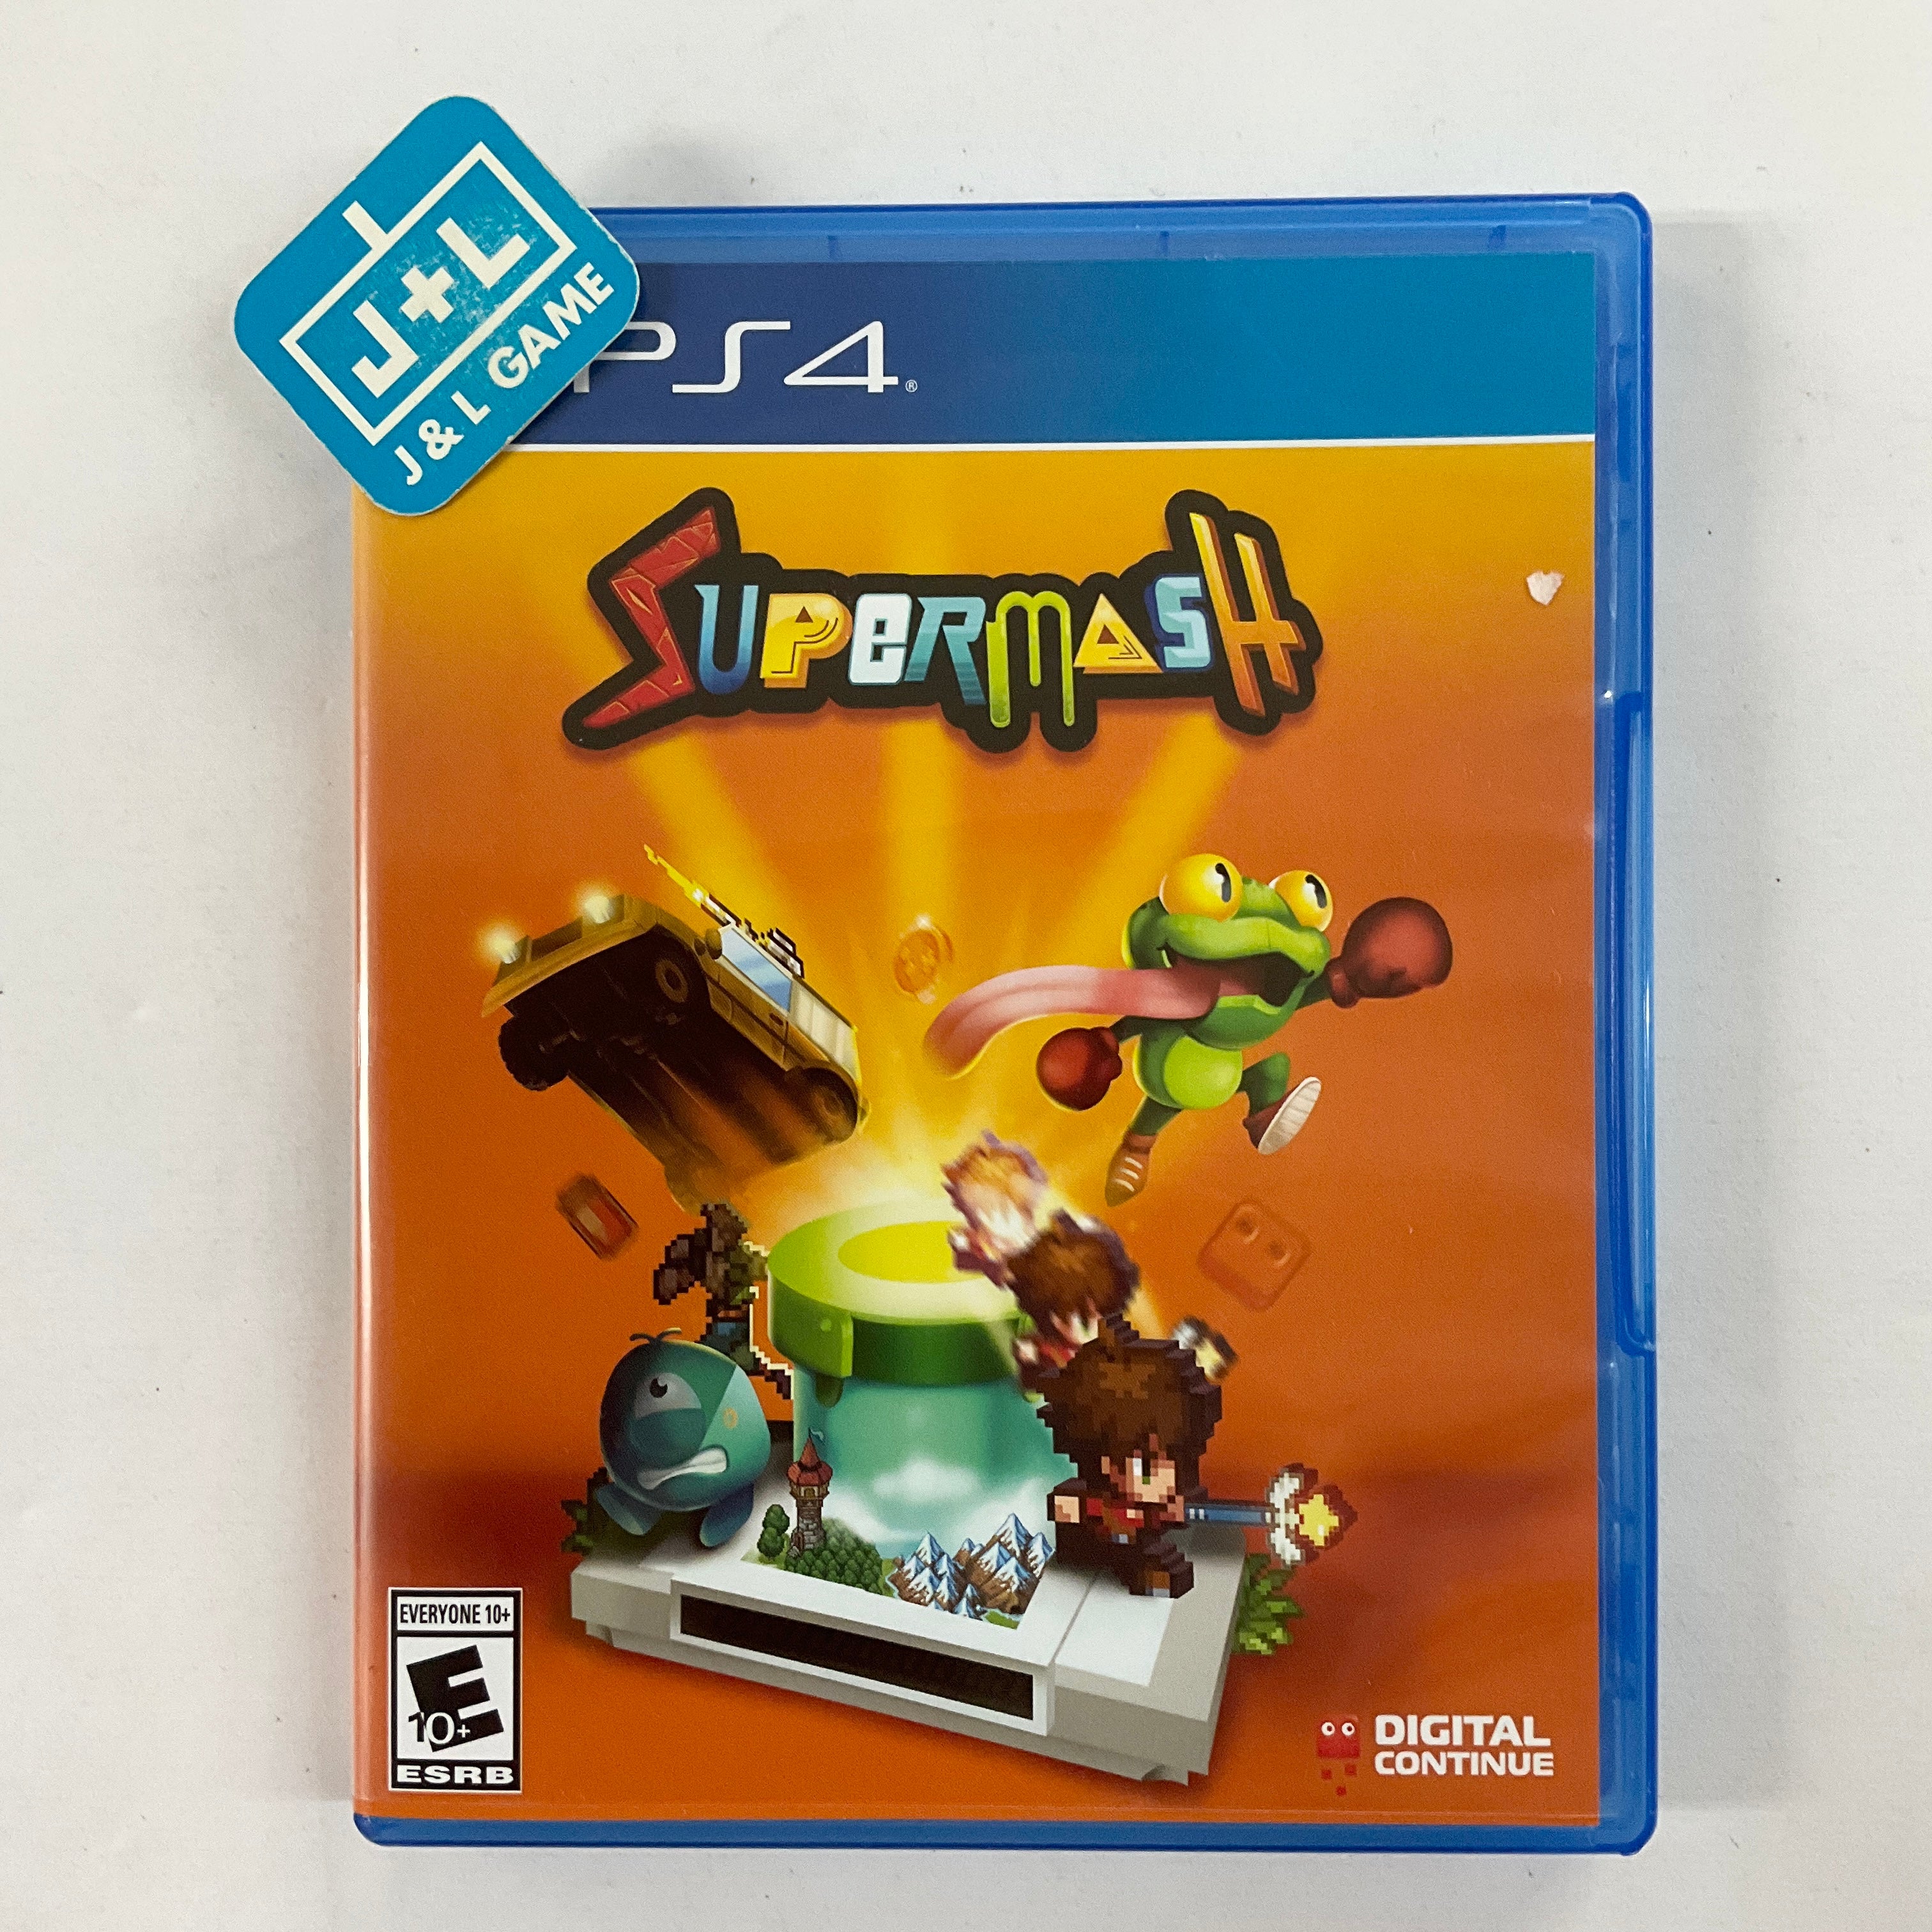 SuperMash (Limited Run #367) - (PS4) PlayStation 4 [Pre-Owned] Video Games Limited Run Games   